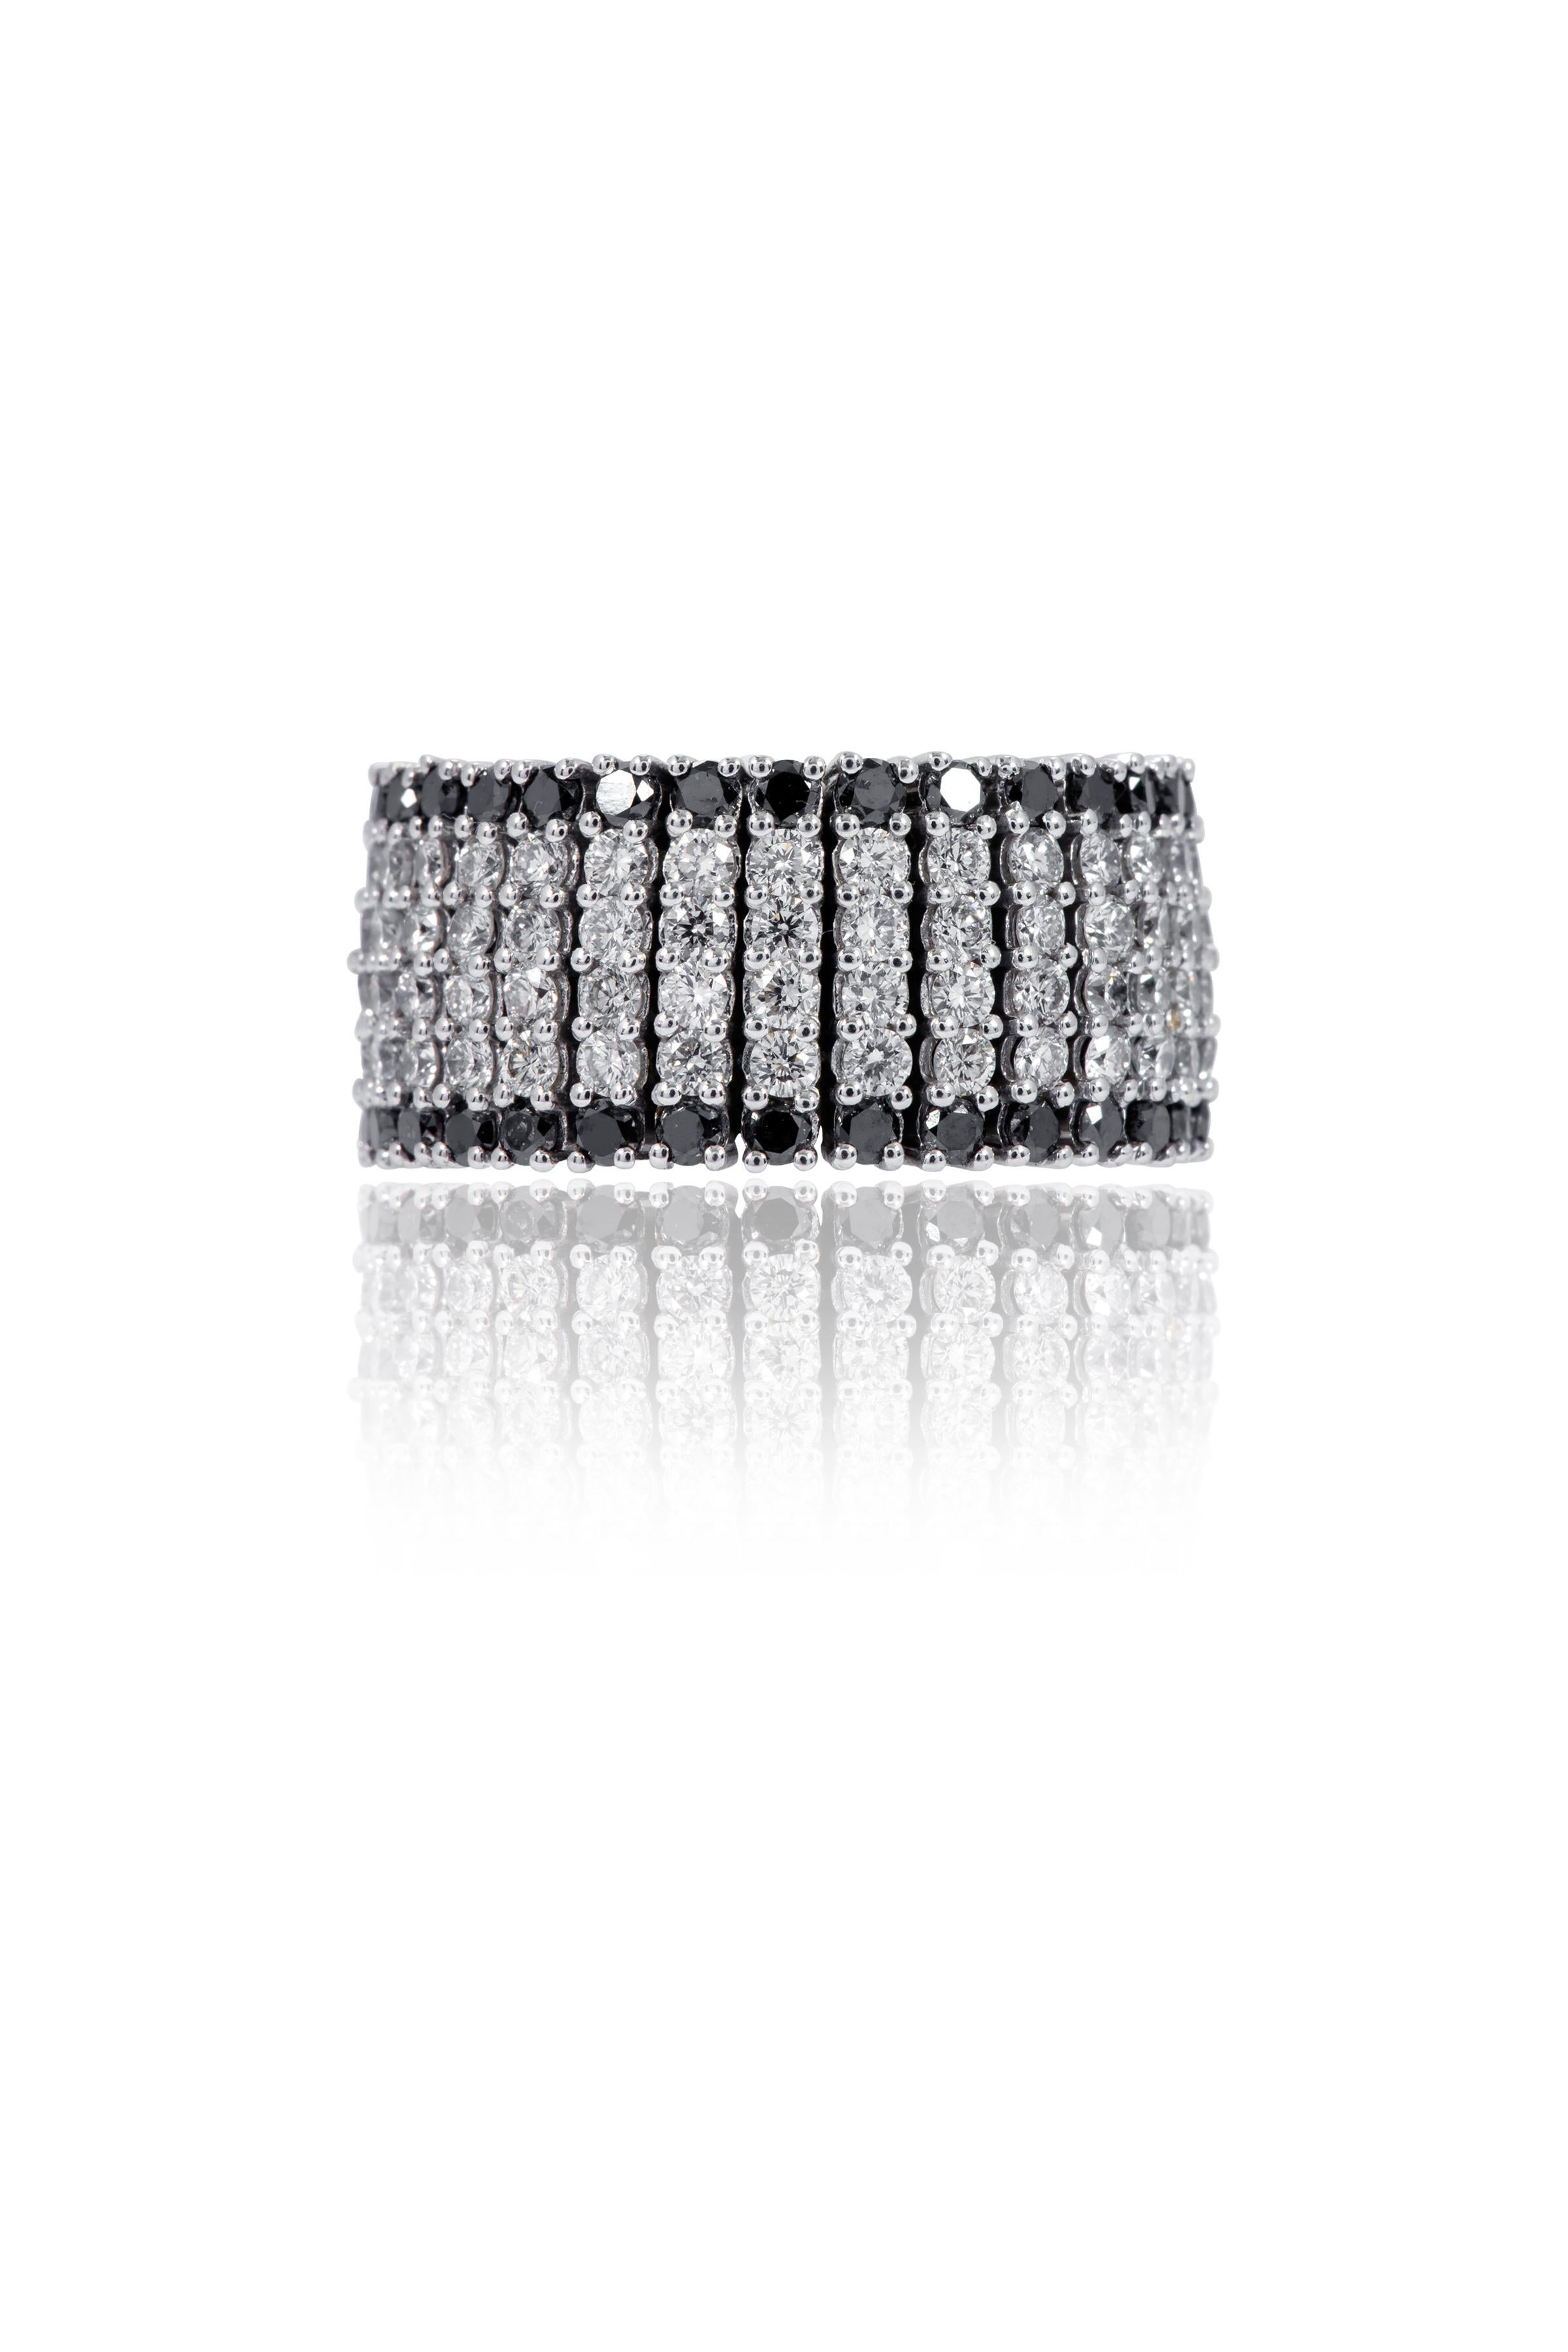 18 Karat White Gold 5.71 Carat White and Black Diamond Flexible Band Ring

This dynamic and rich black and white diamond flexible full band is marvelous. The broad band with three successive white round diamonds and two black round diamonds on